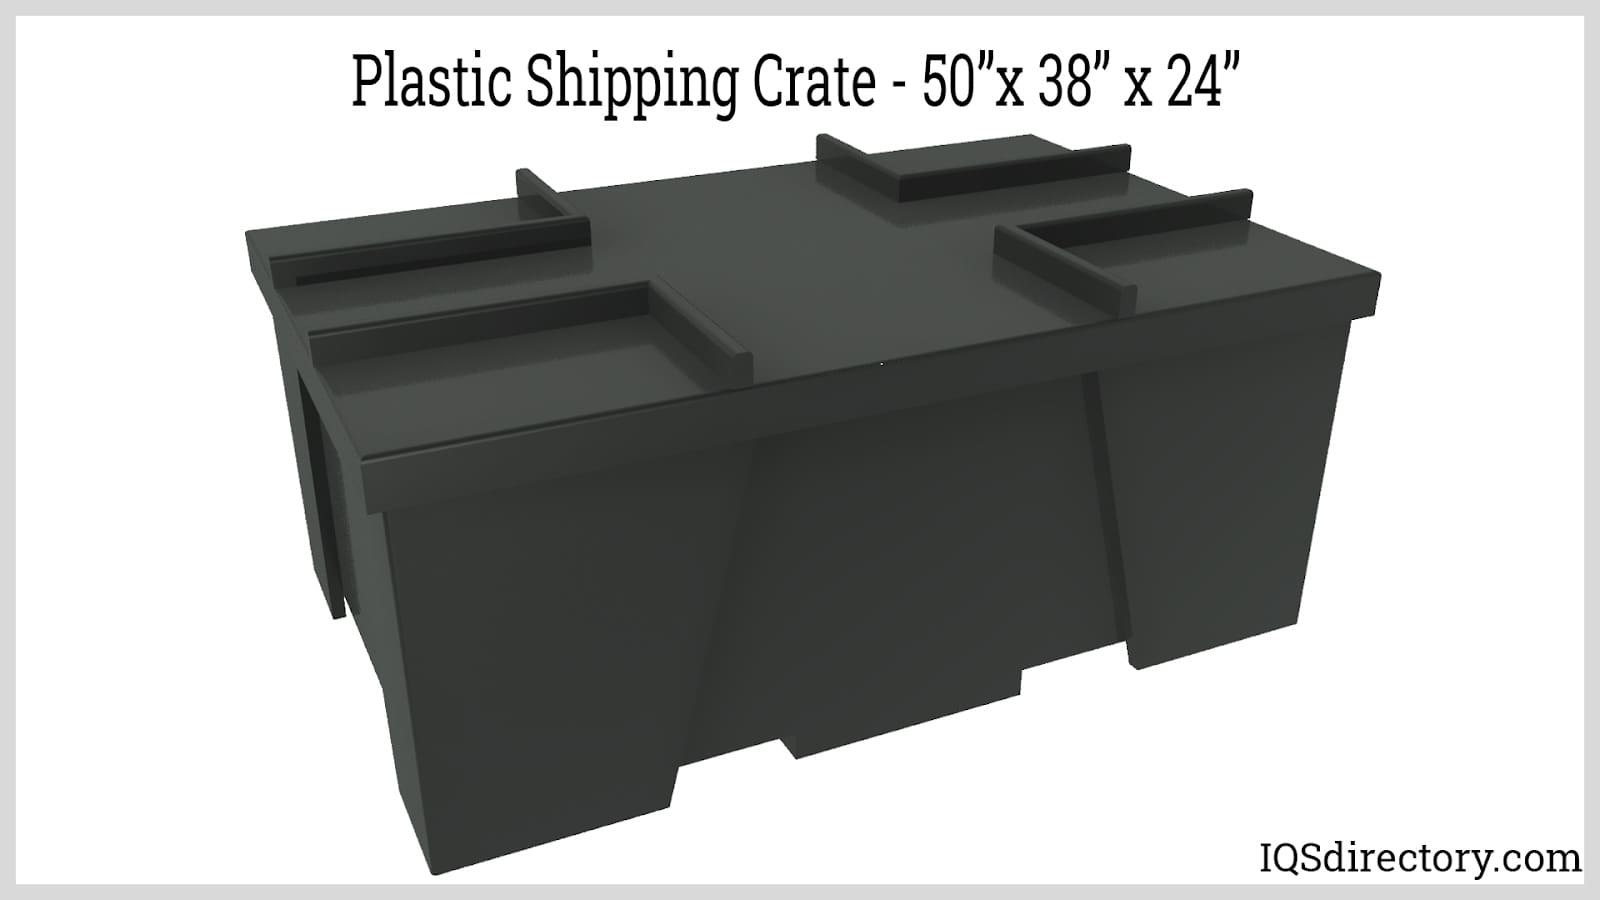 Plastic Shipping Crate - 50' x 38' x 24'